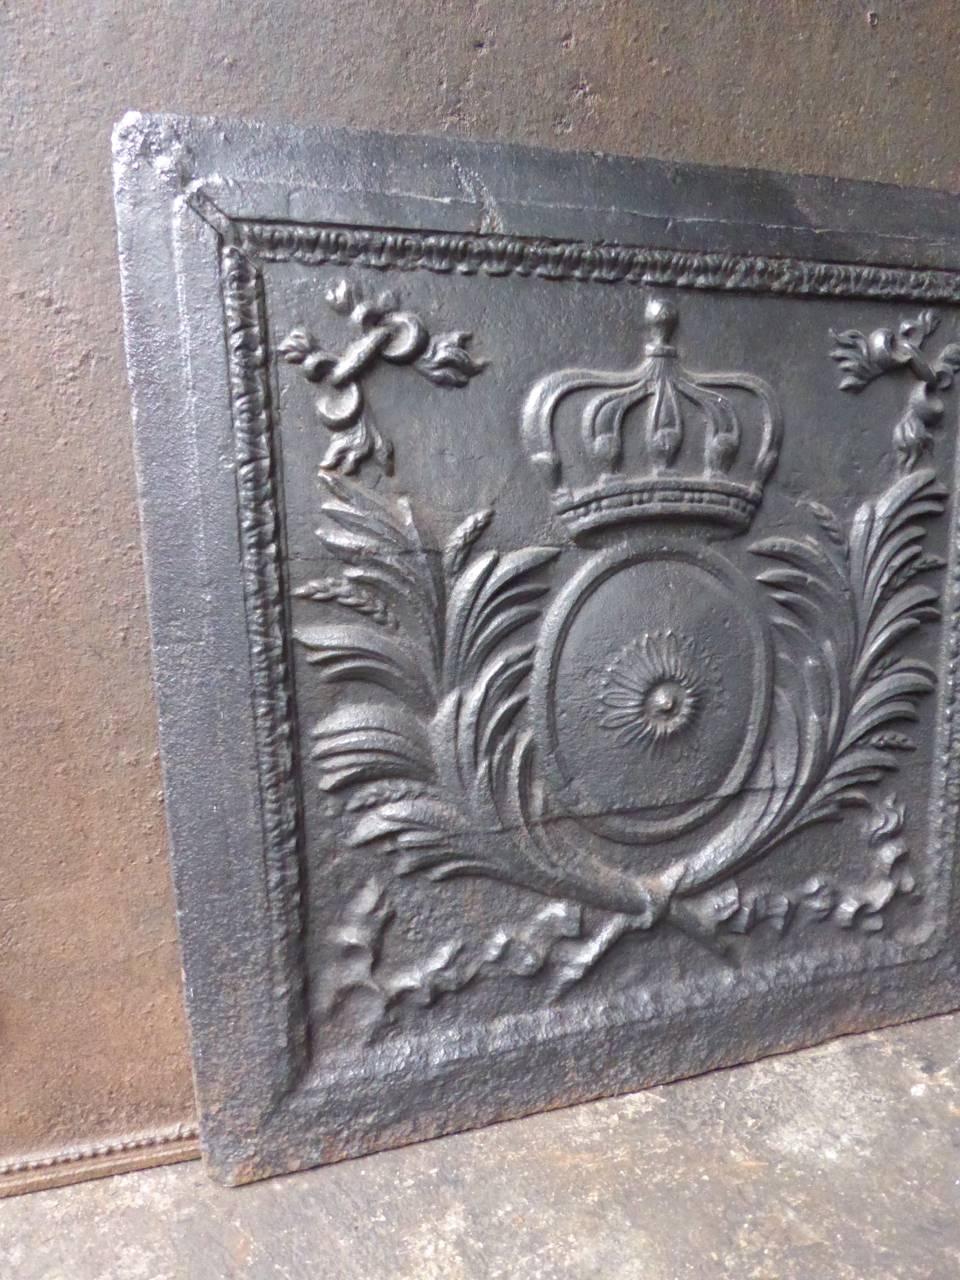 19th century French fireback with the arms of France. 

The sun symbolizes King Louis XIV, the crown stands for royalty and the palm leaves for victory and peace.